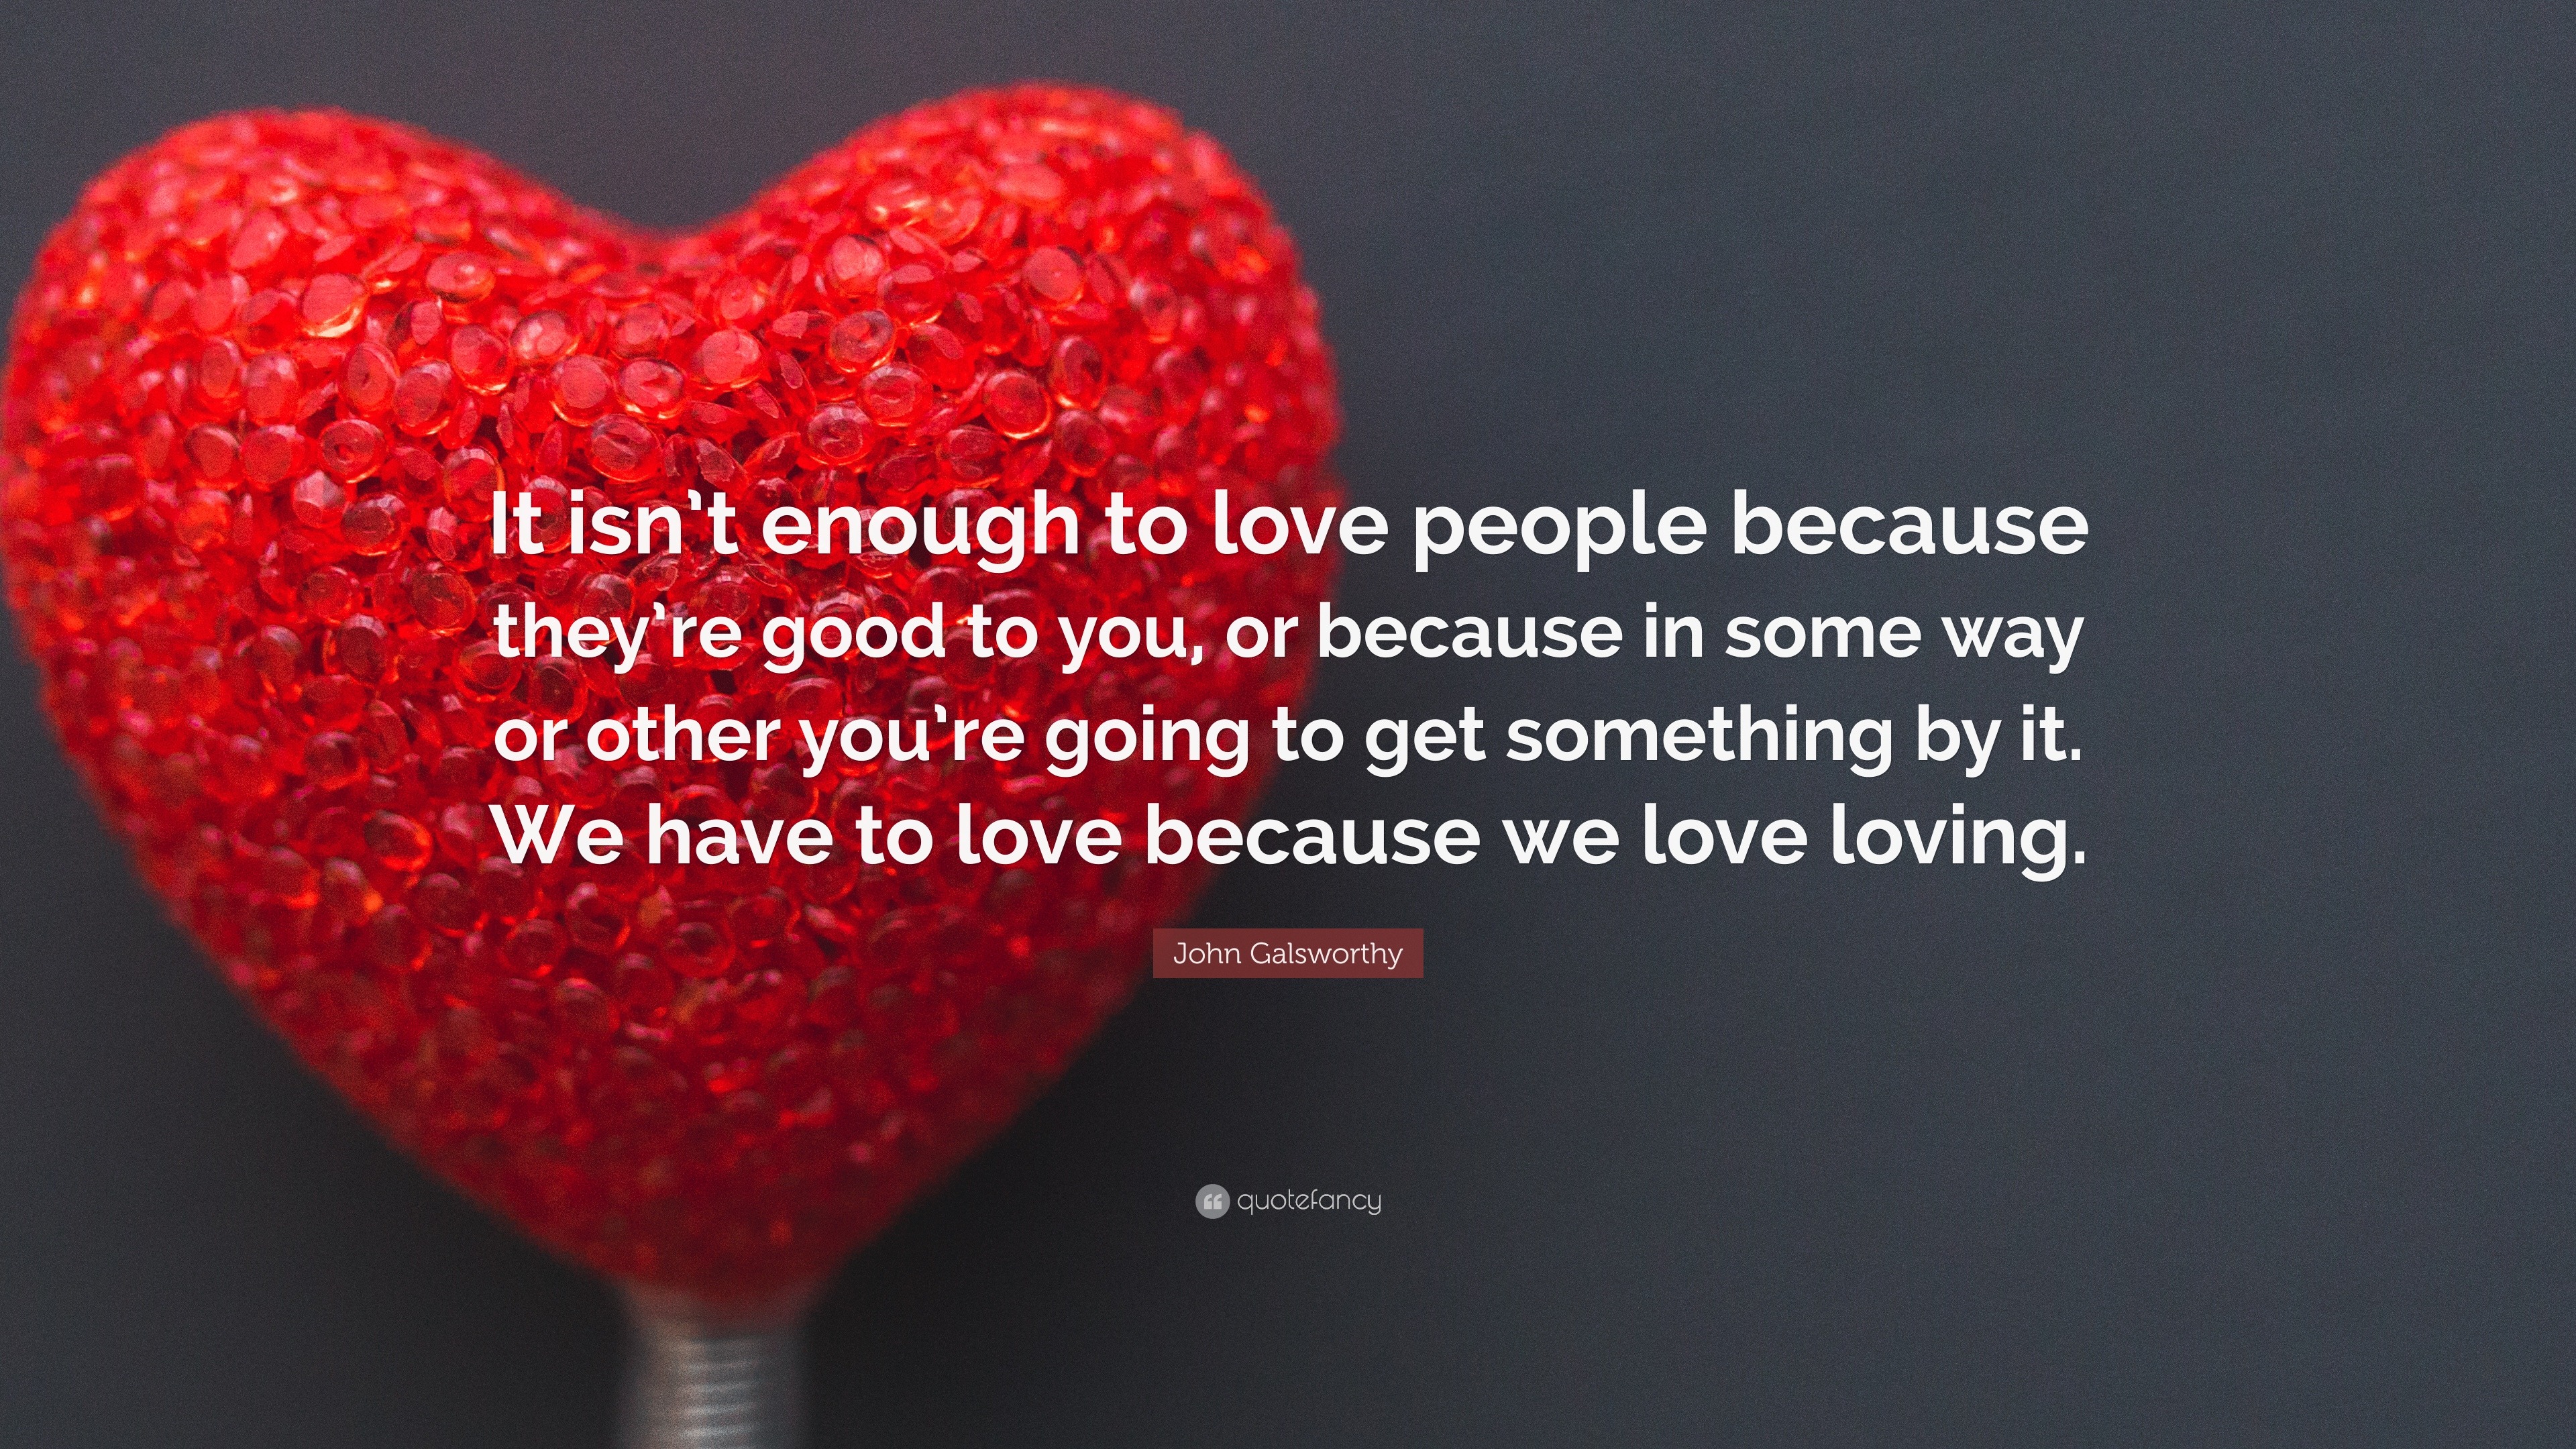 John Galsworthy Quote: “It isn't enough to love people because